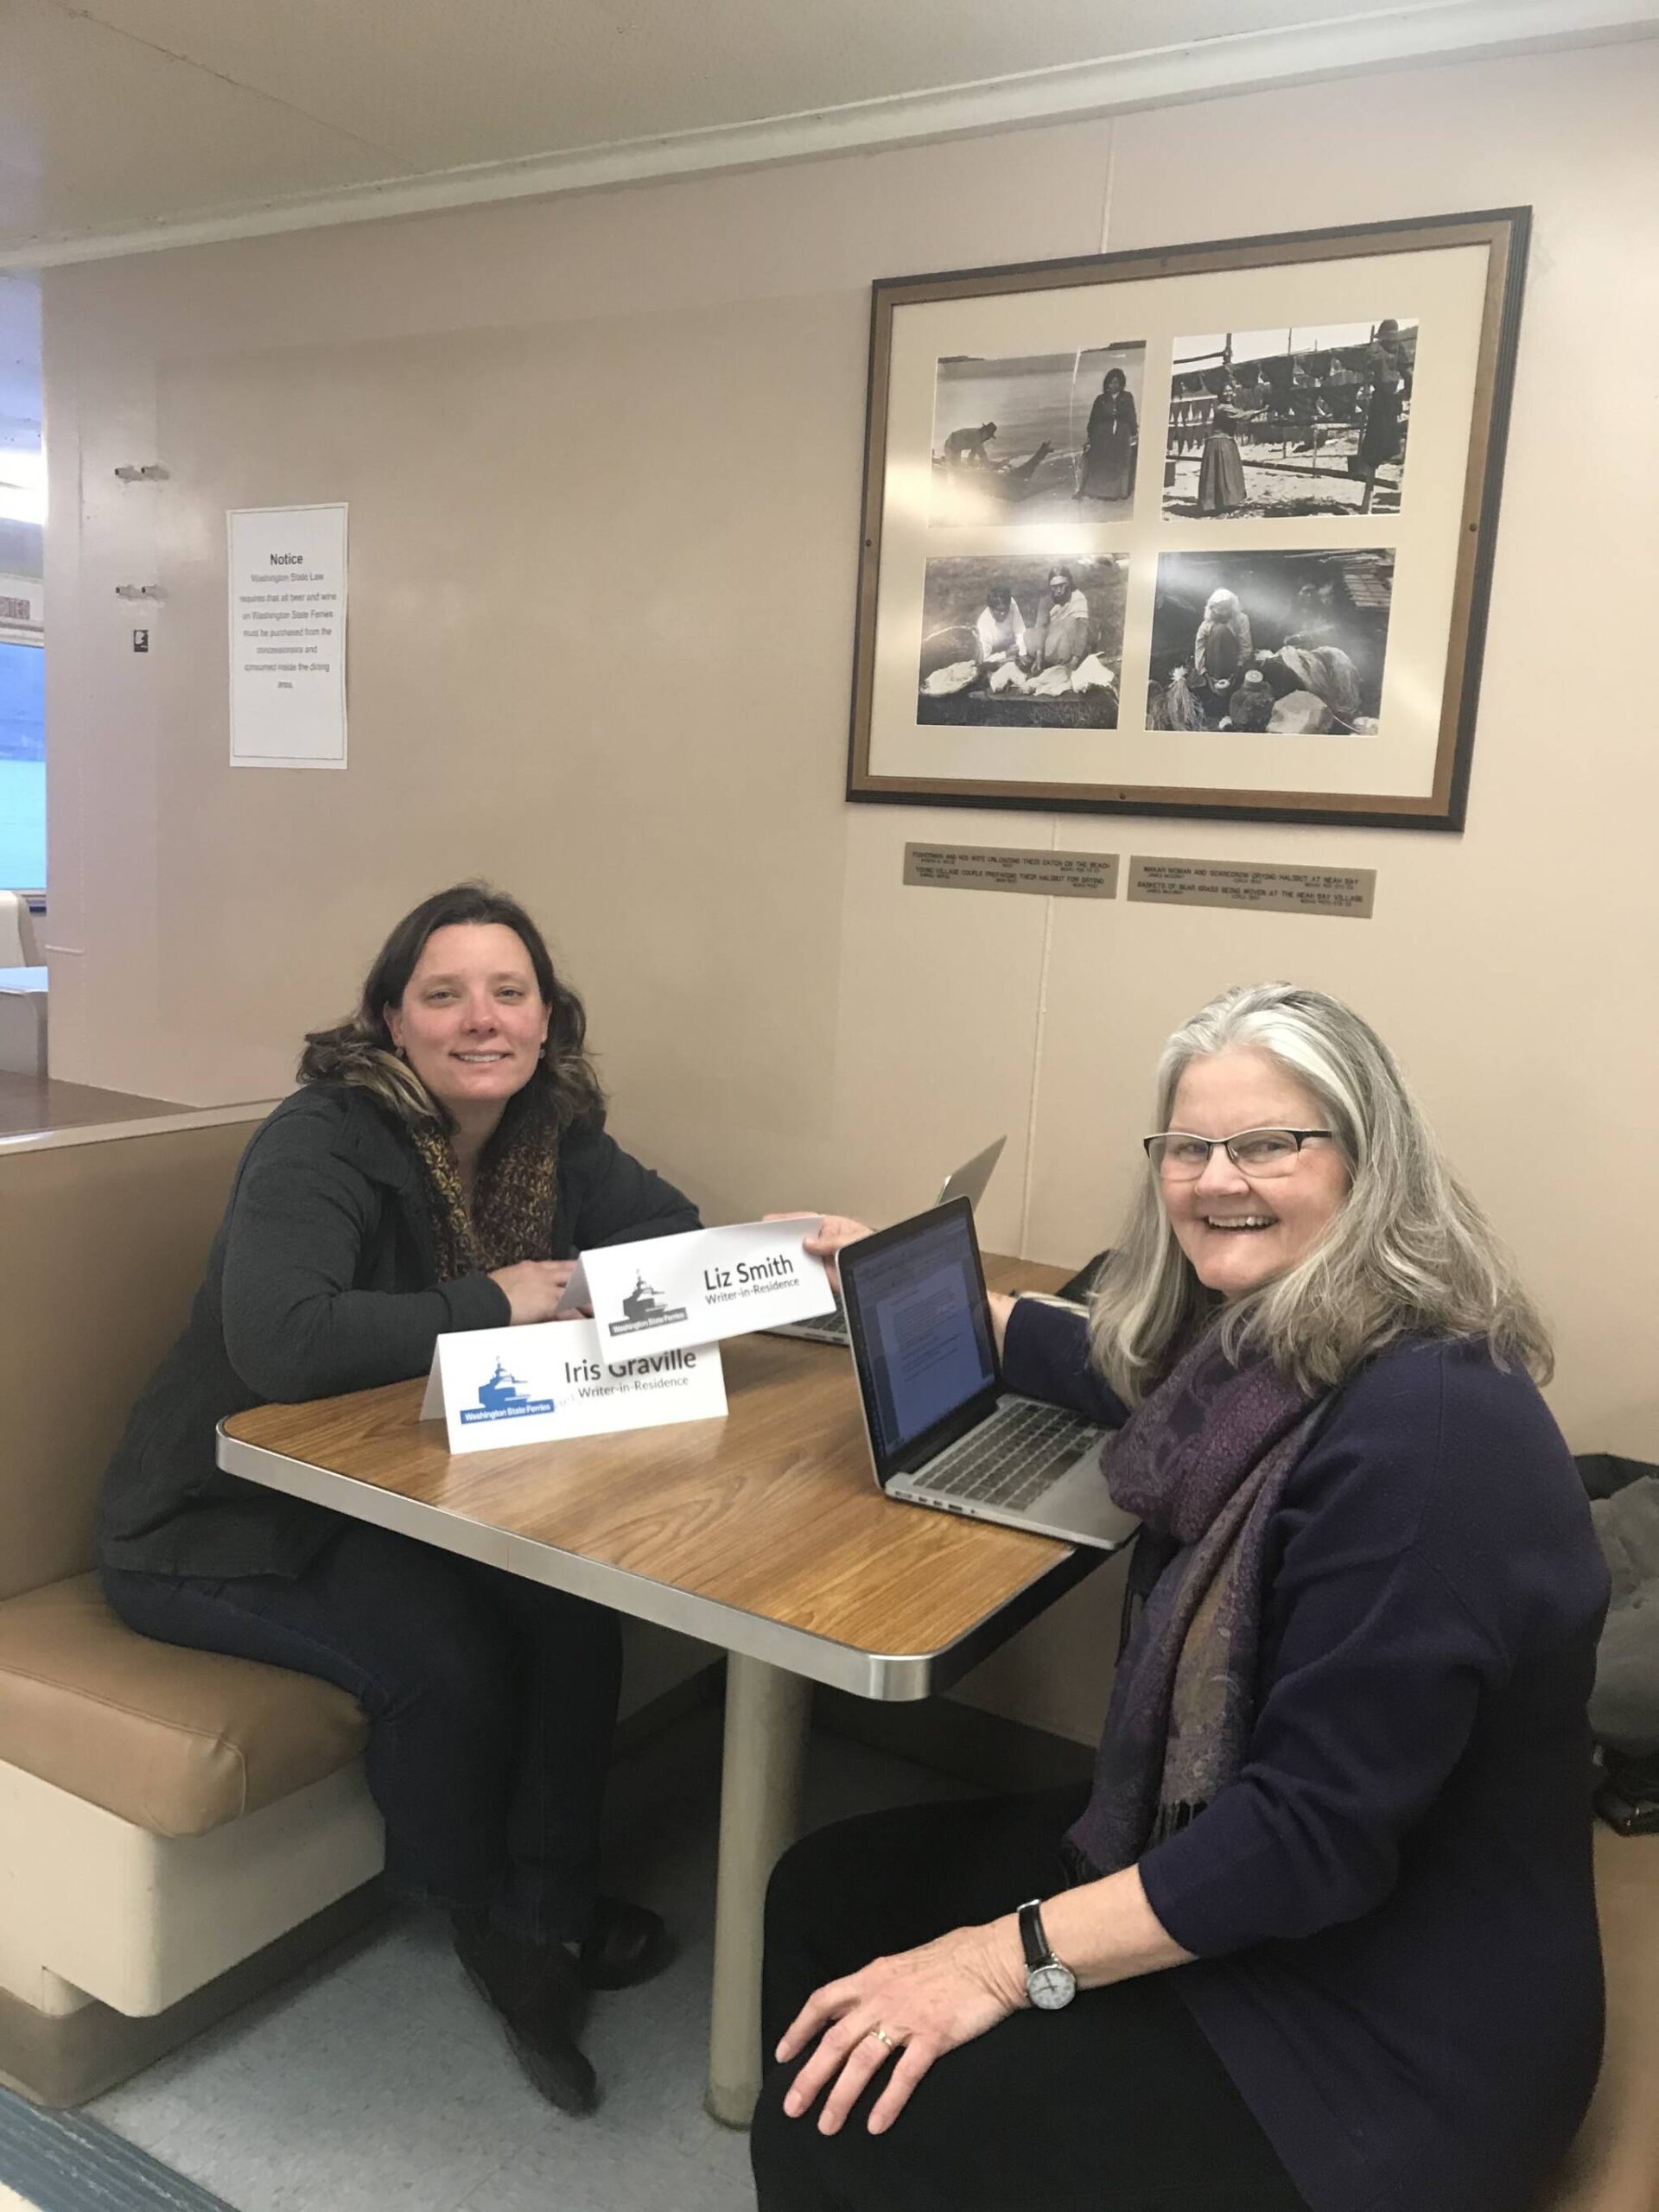 Contributed photo
Liz Smith and Iris Graville, former Writers-in-Residence, Washington State Ferries